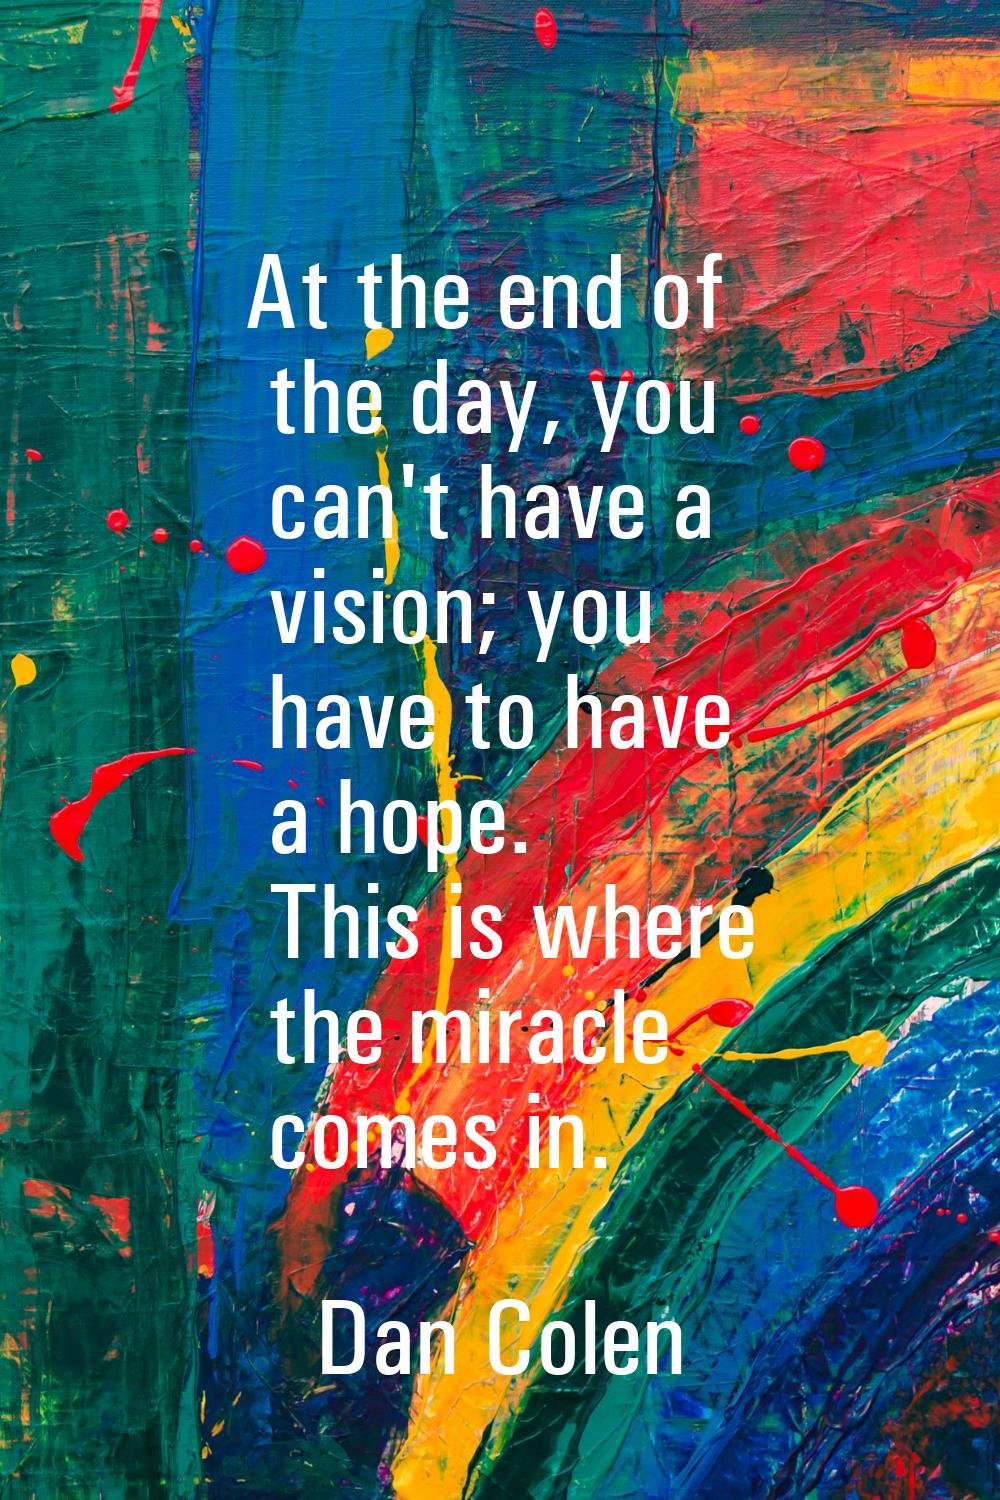 At the end of the day, you can't have a vision; you have to have a hope. This is where the miracle 